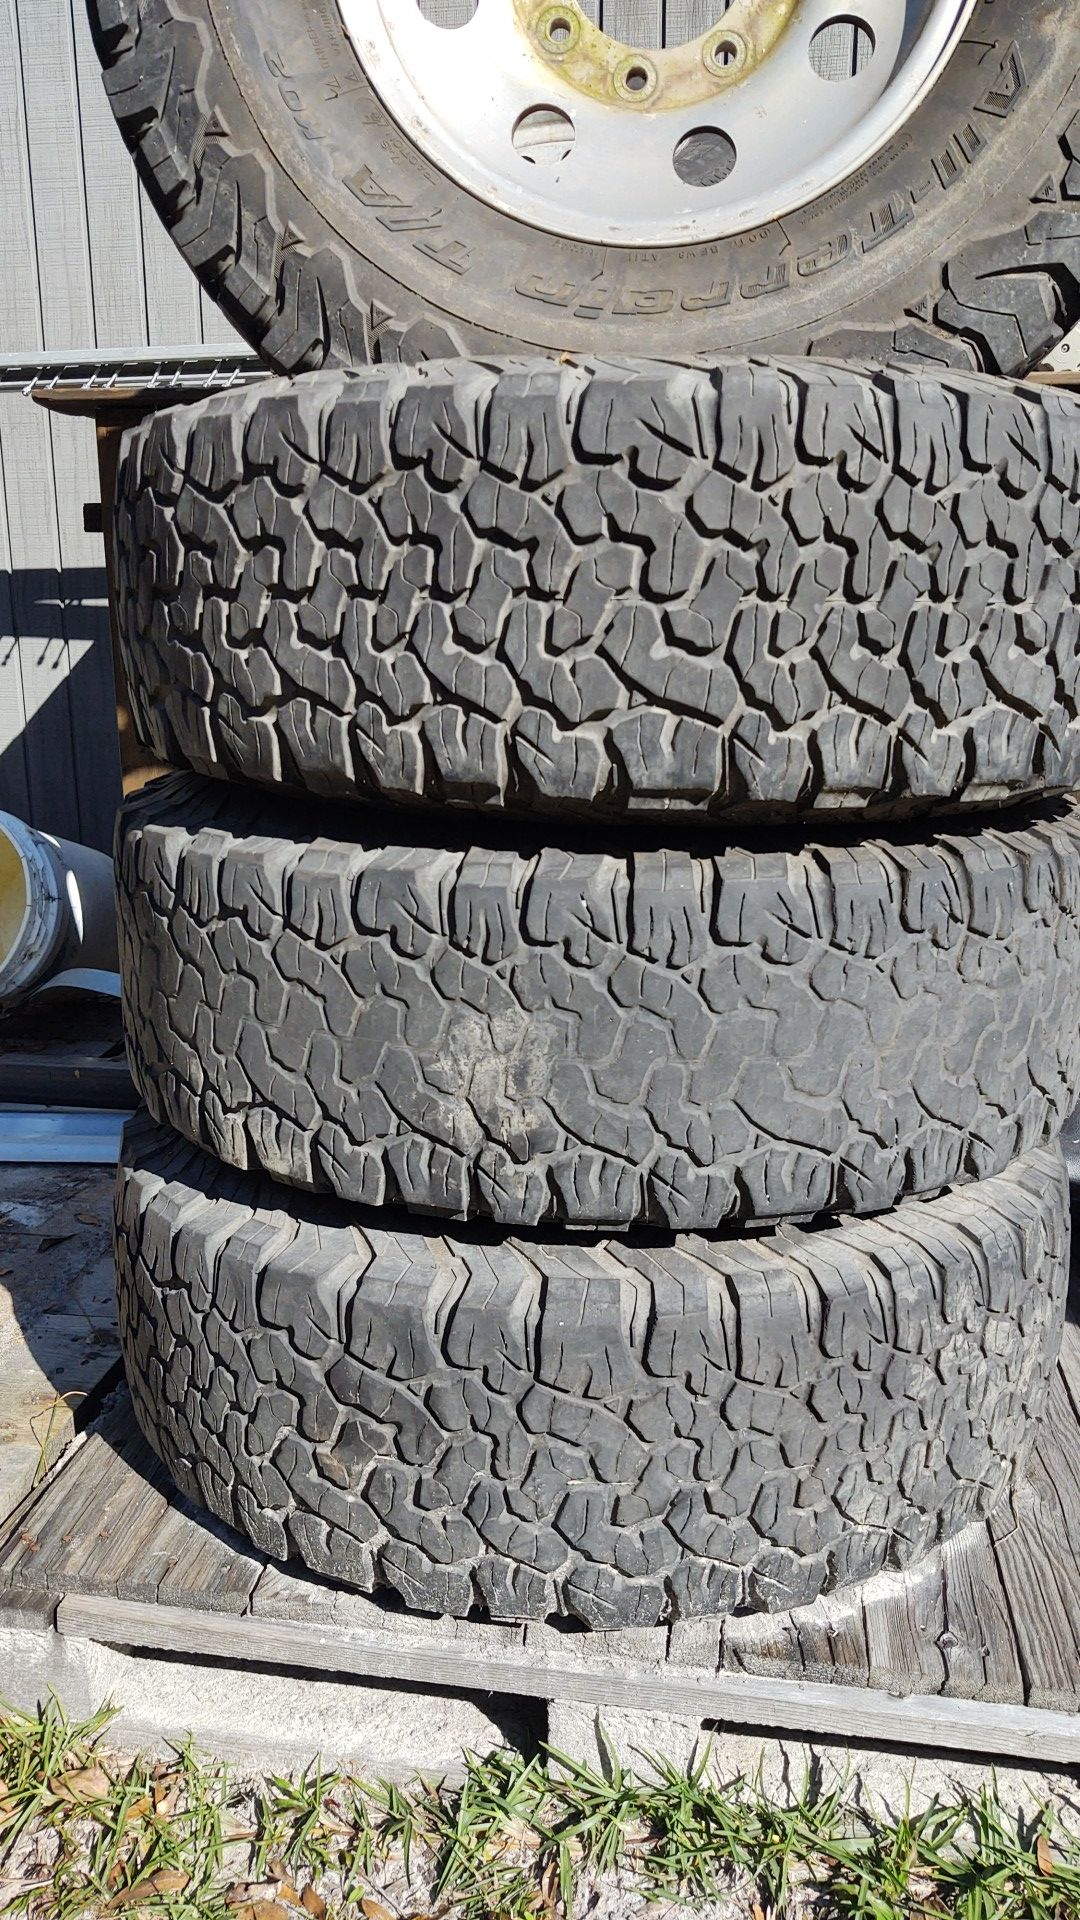 99 Ford F-250 tires and aluminum wheels